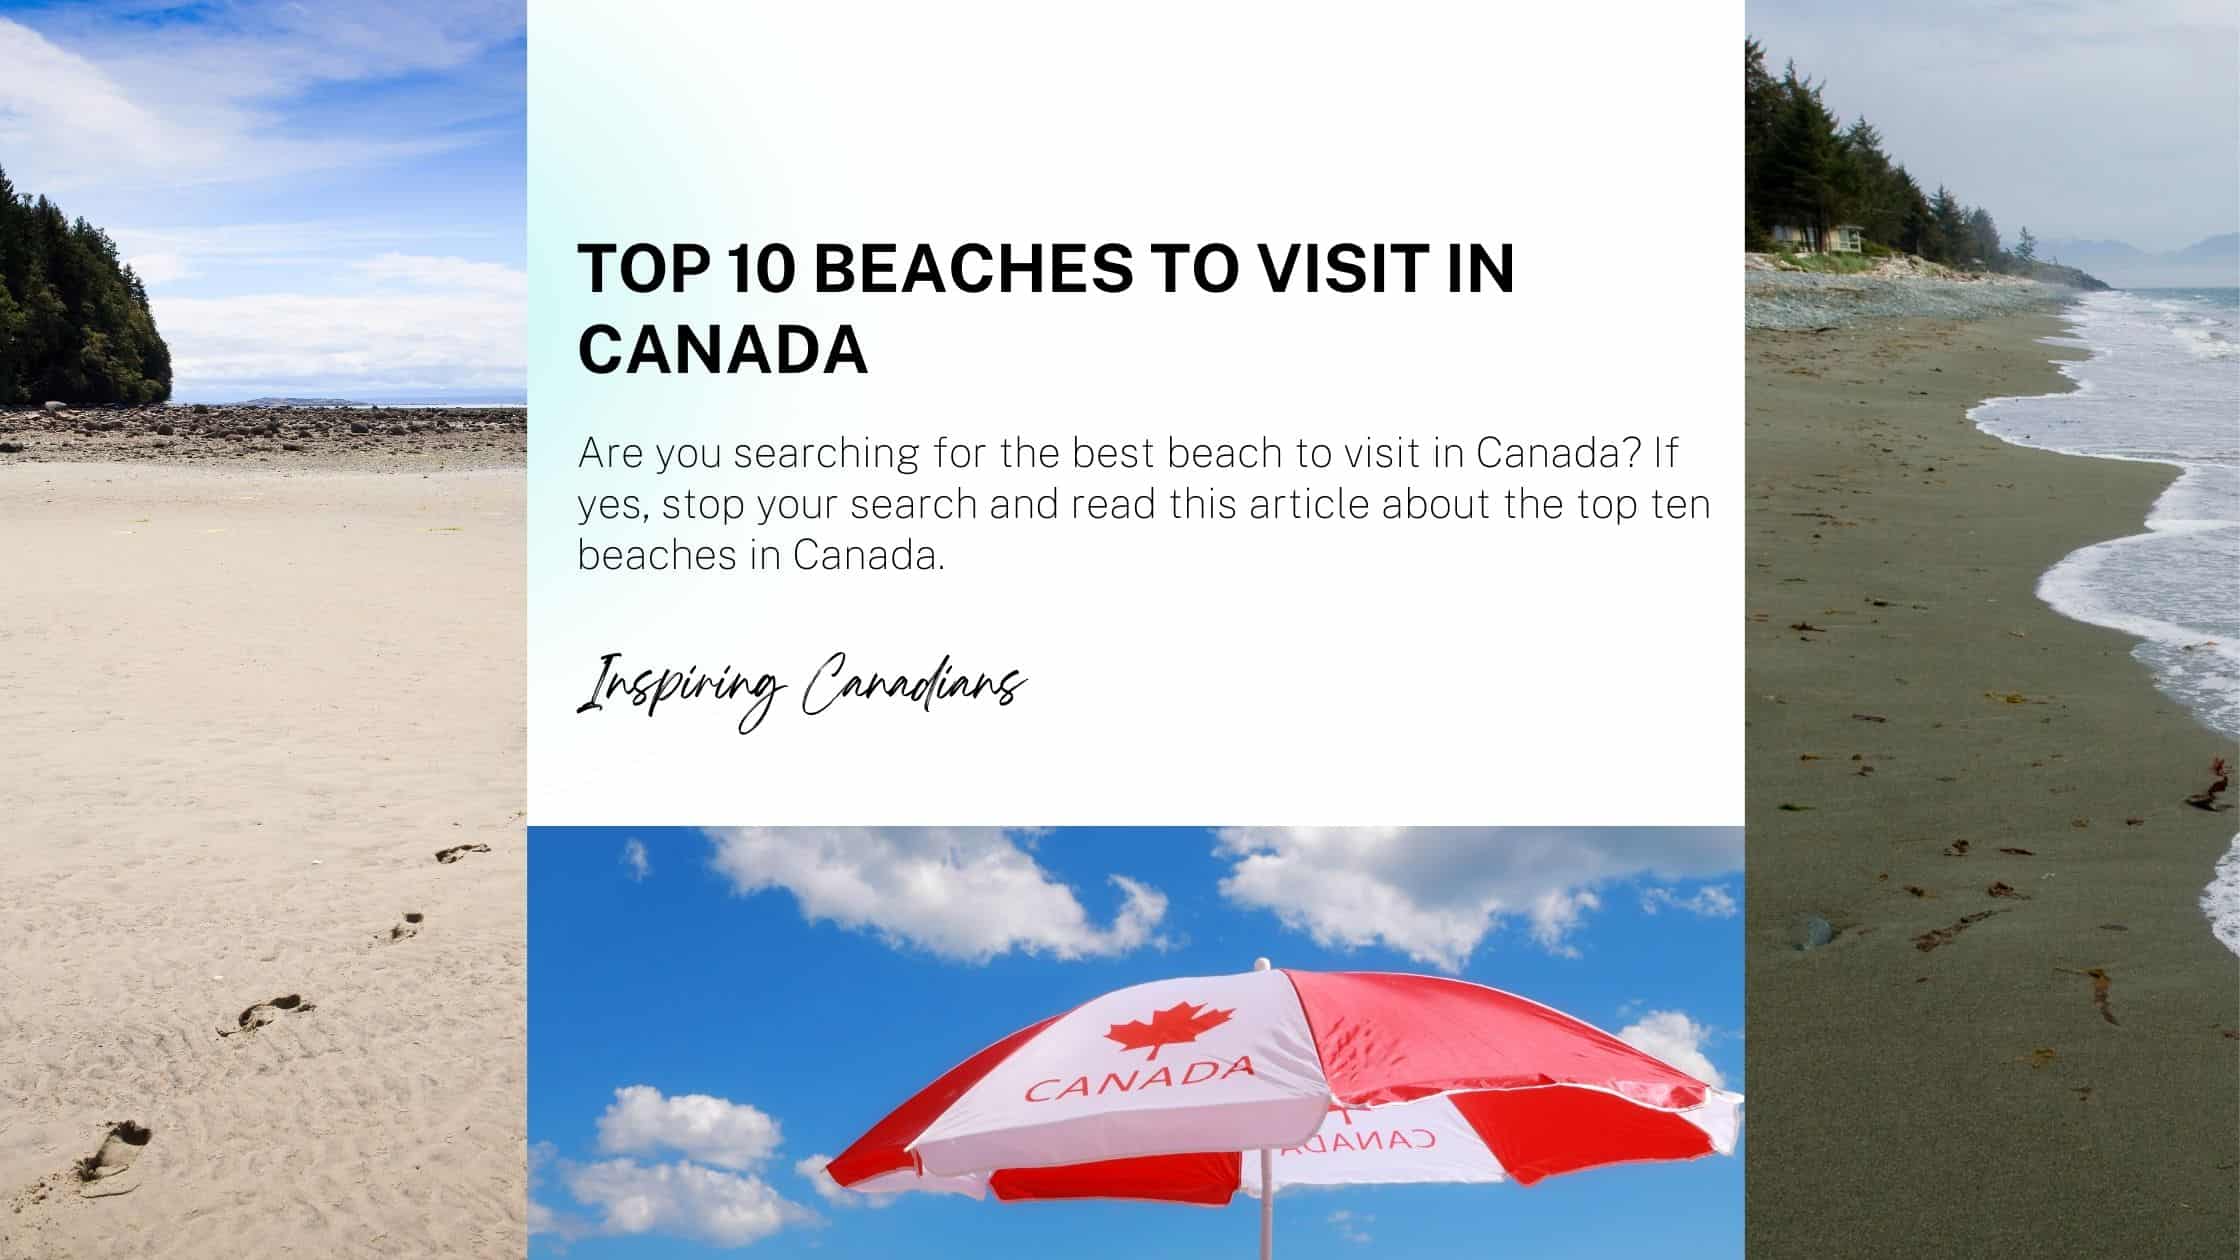 Top 10 beaches to visit in Canada